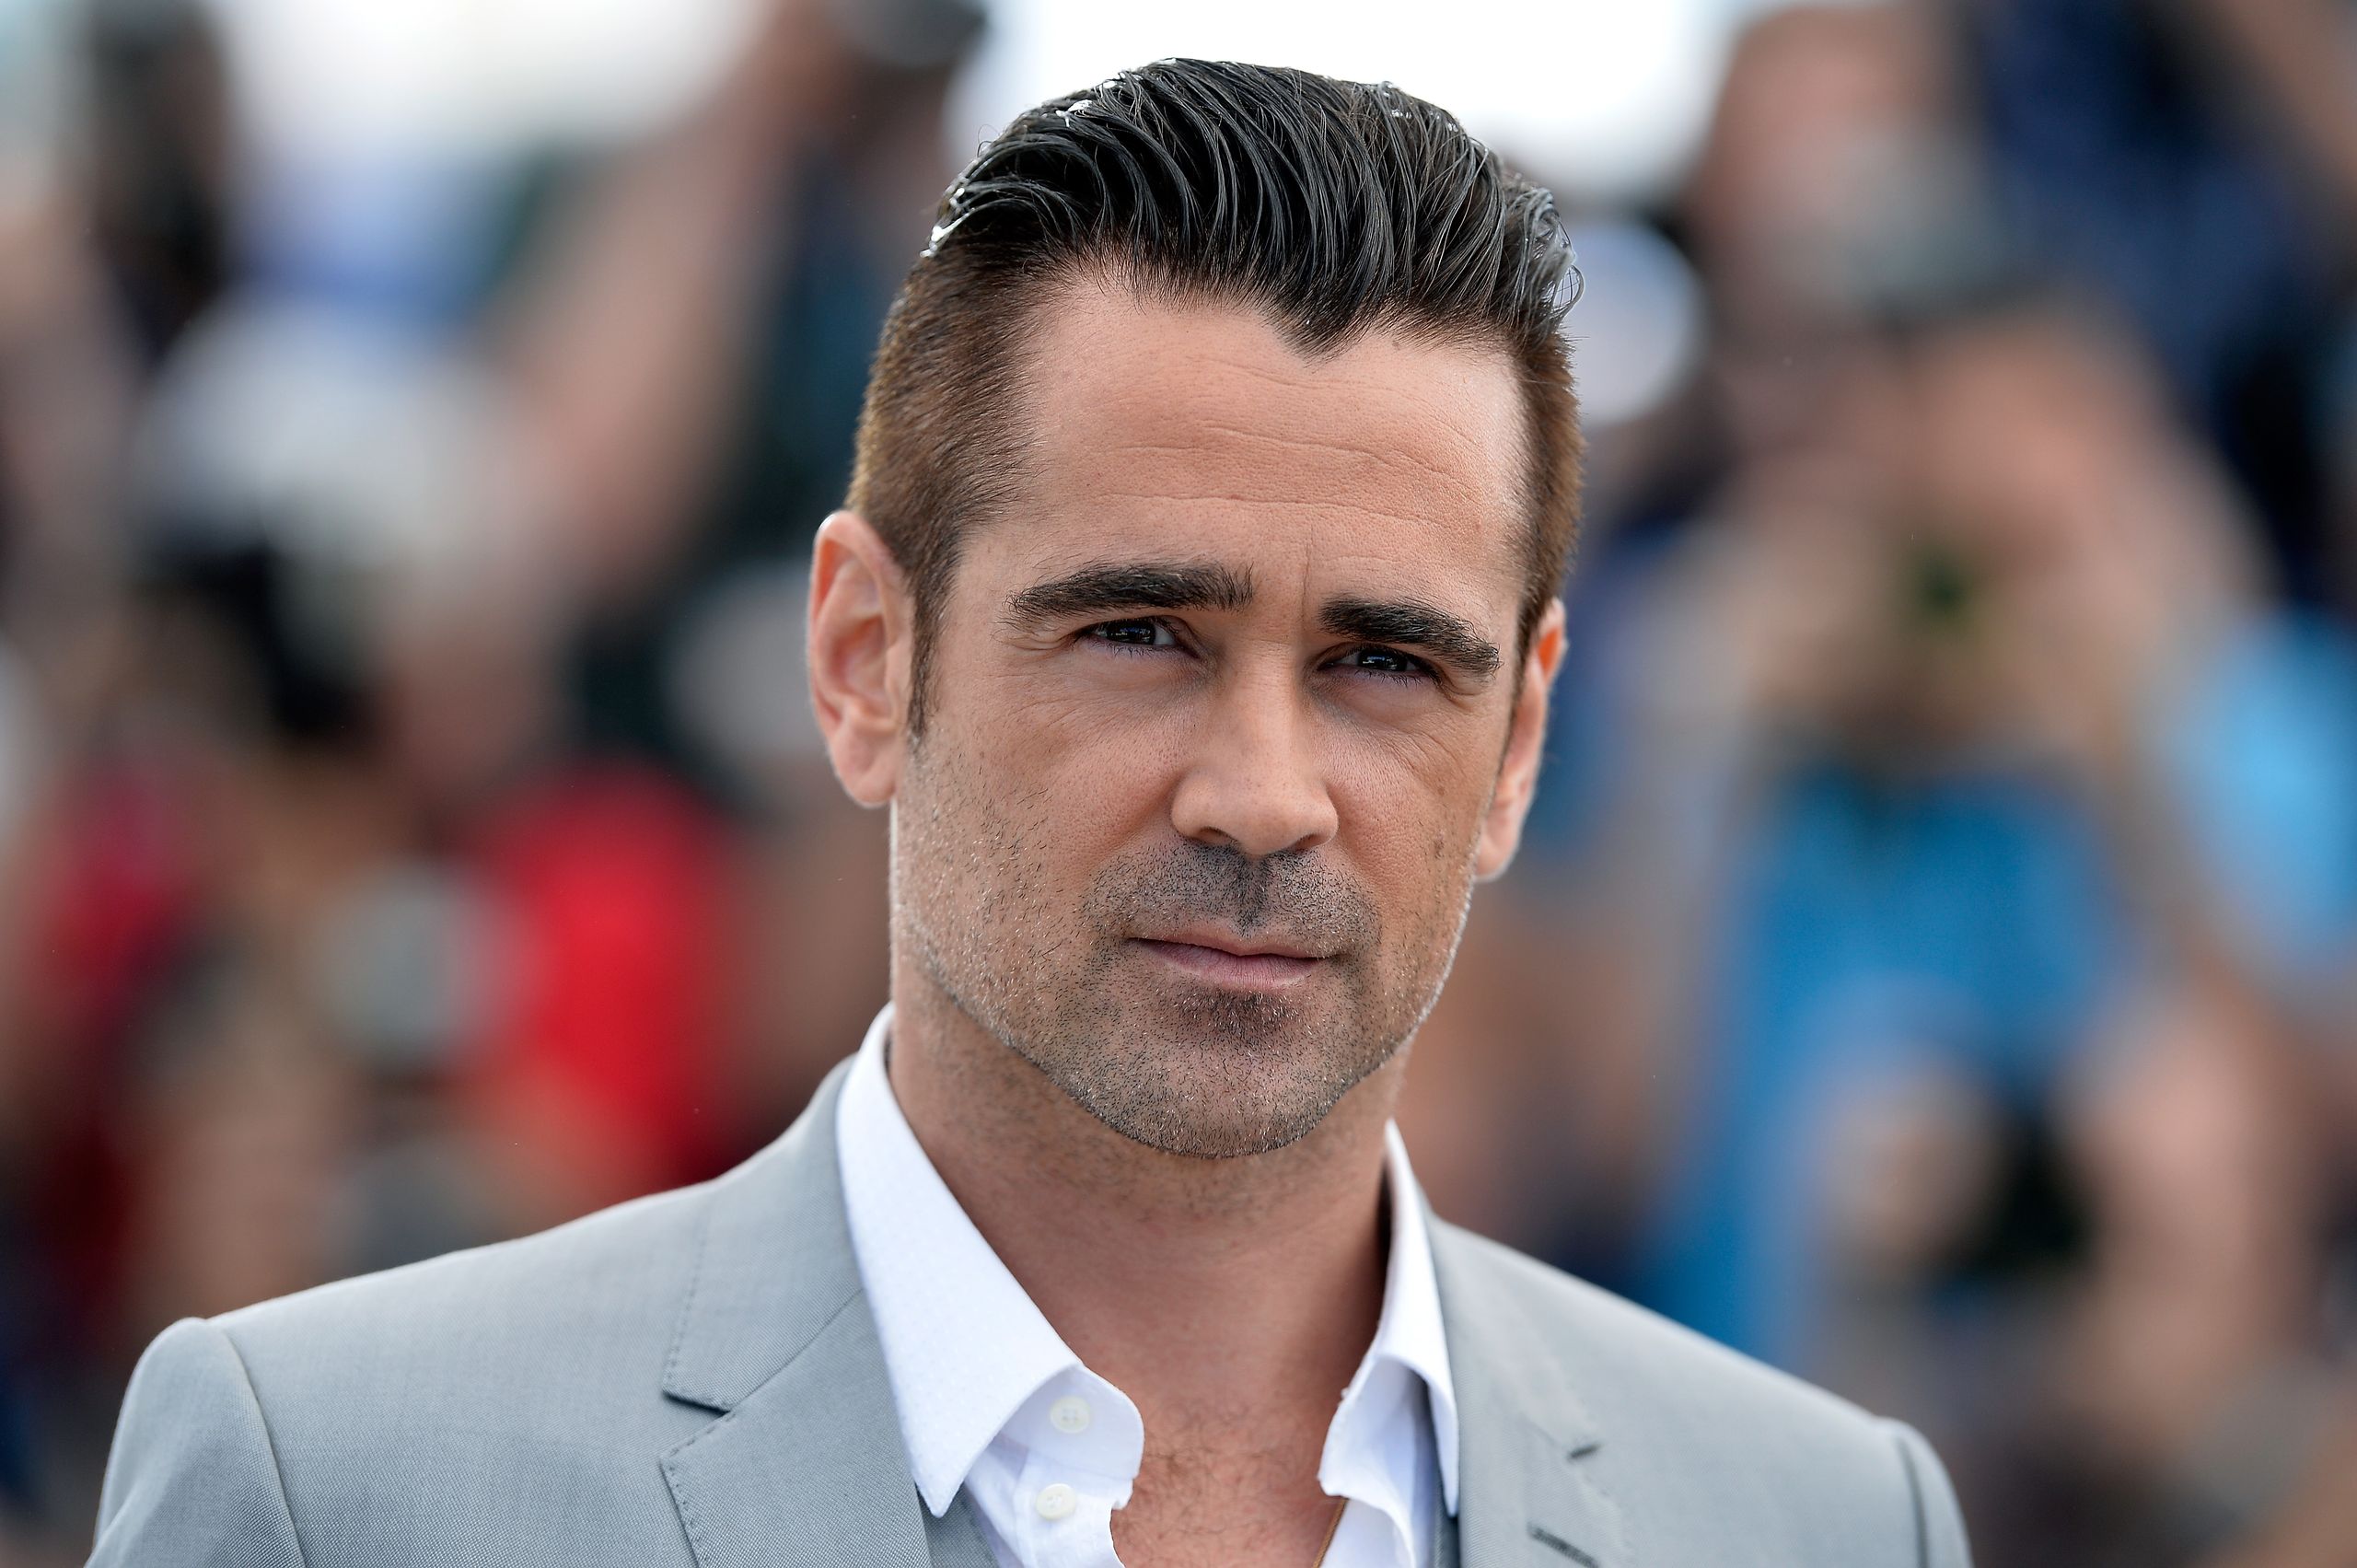 https://hips.hearstapps.com/hmg-prod.s3.amazonaws.com/images/actor-colin-farrell-attends-a-photocall-for-the-lobster-news-photo-1581677852.jpg?resize=2560:*